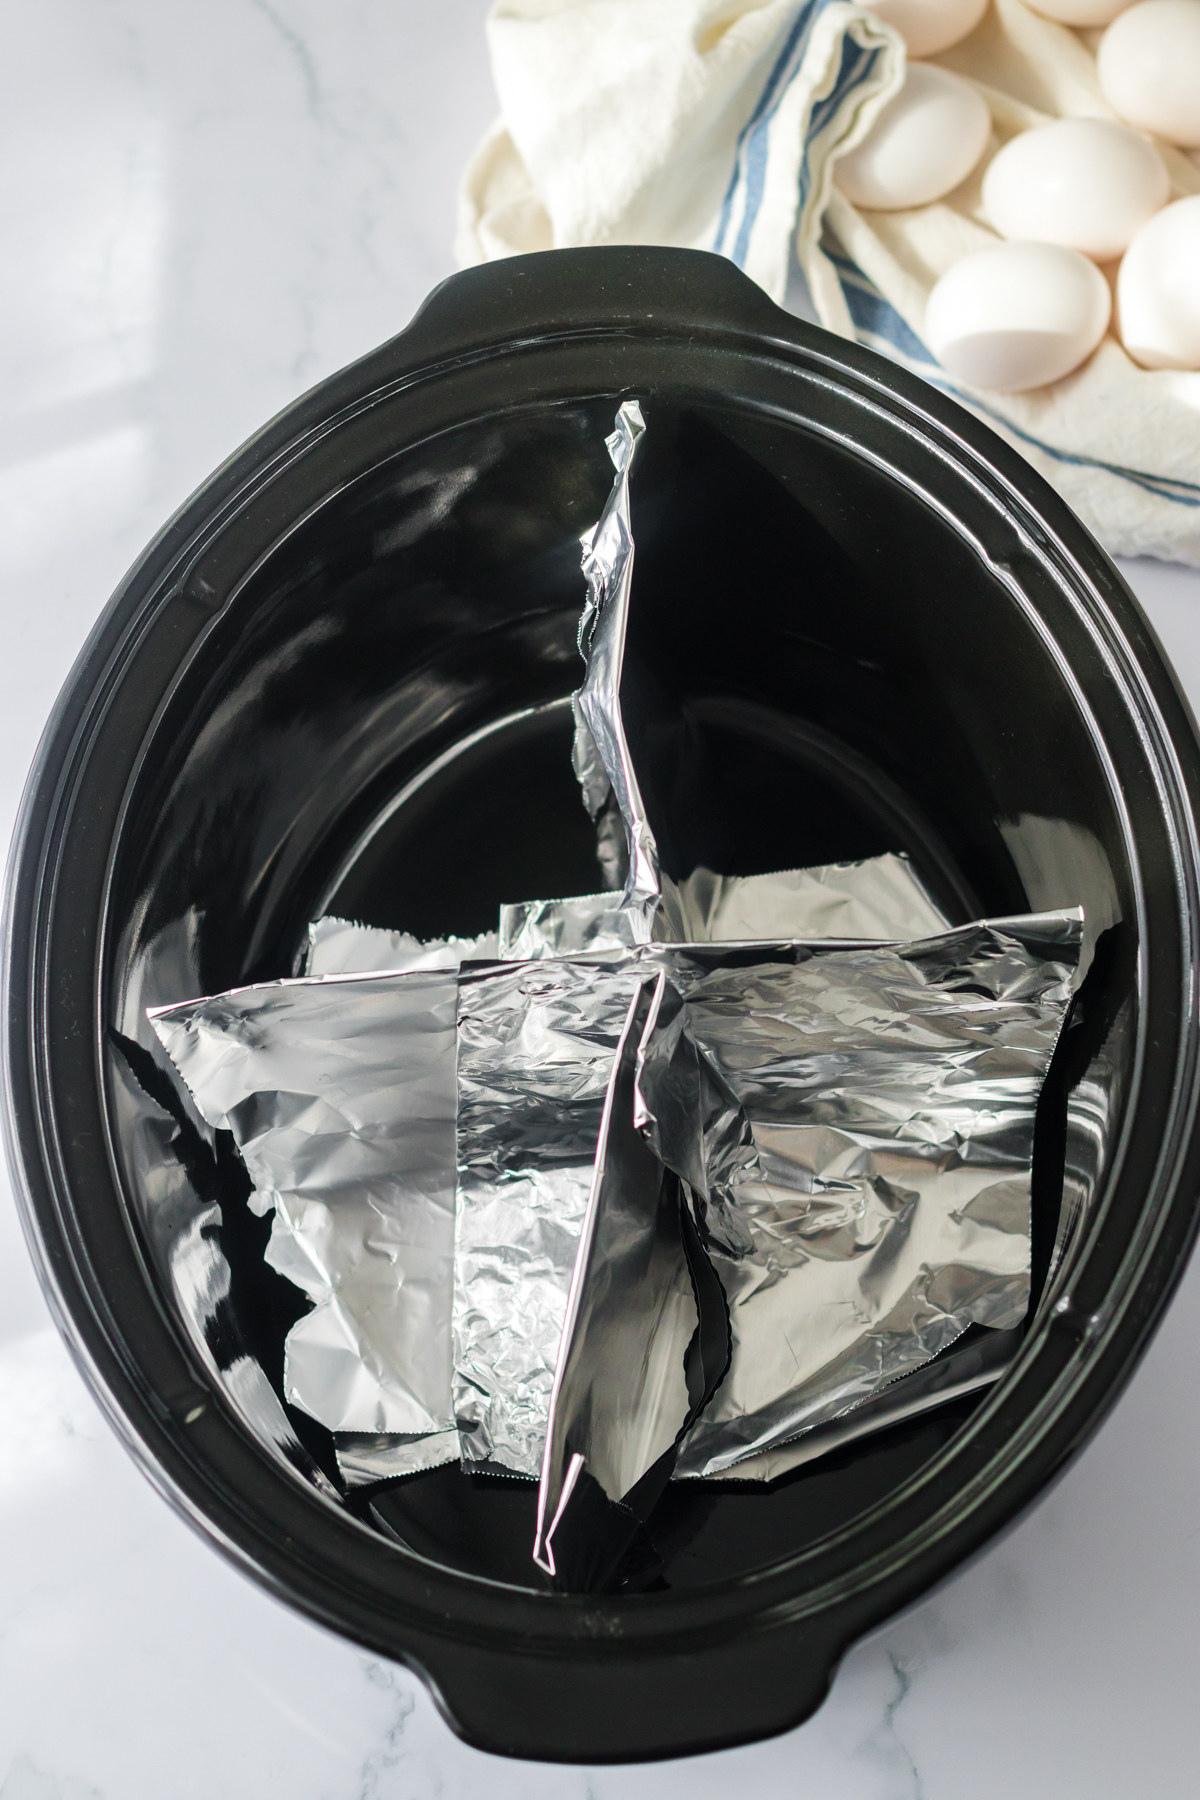 slow cooker with pieces of aluminum foil separating it